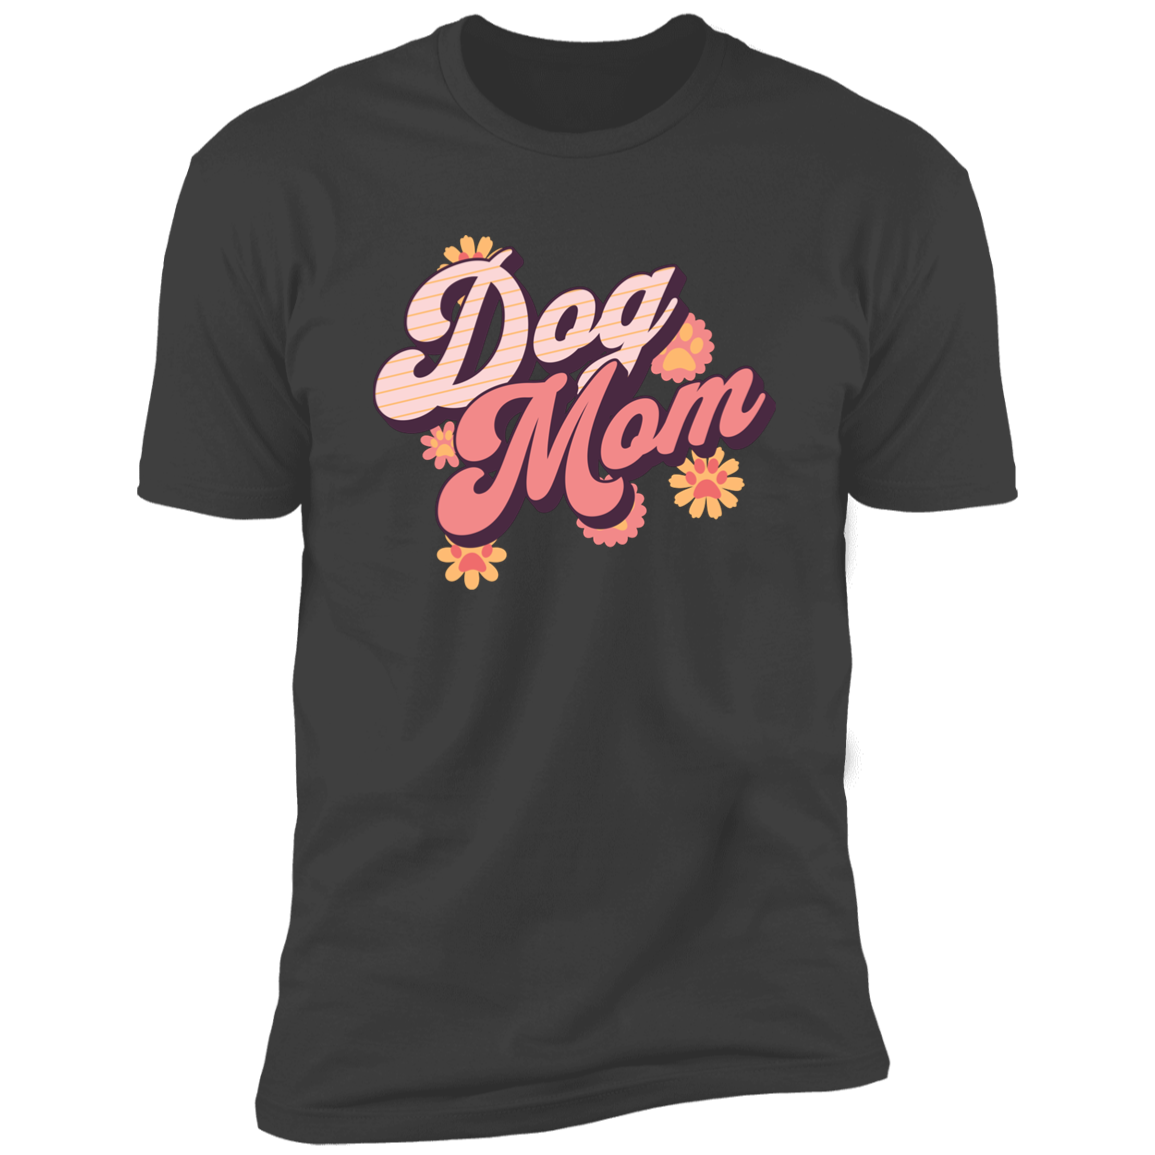 Retro Dog Mom t-shirt, Dog Mom shirt, Dog T-shirt for humans, in heavy metal gray